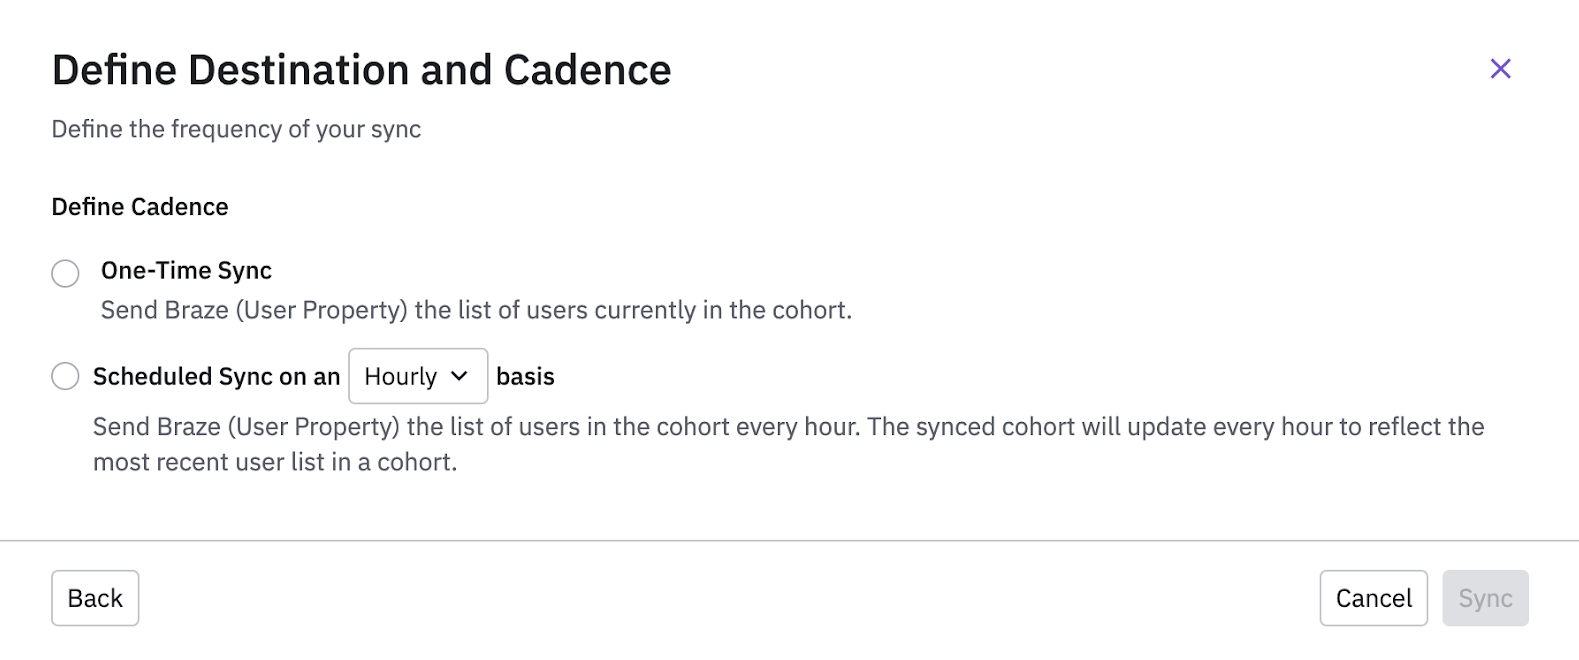 Define your cadence as a one-time sync or scheduled sync.